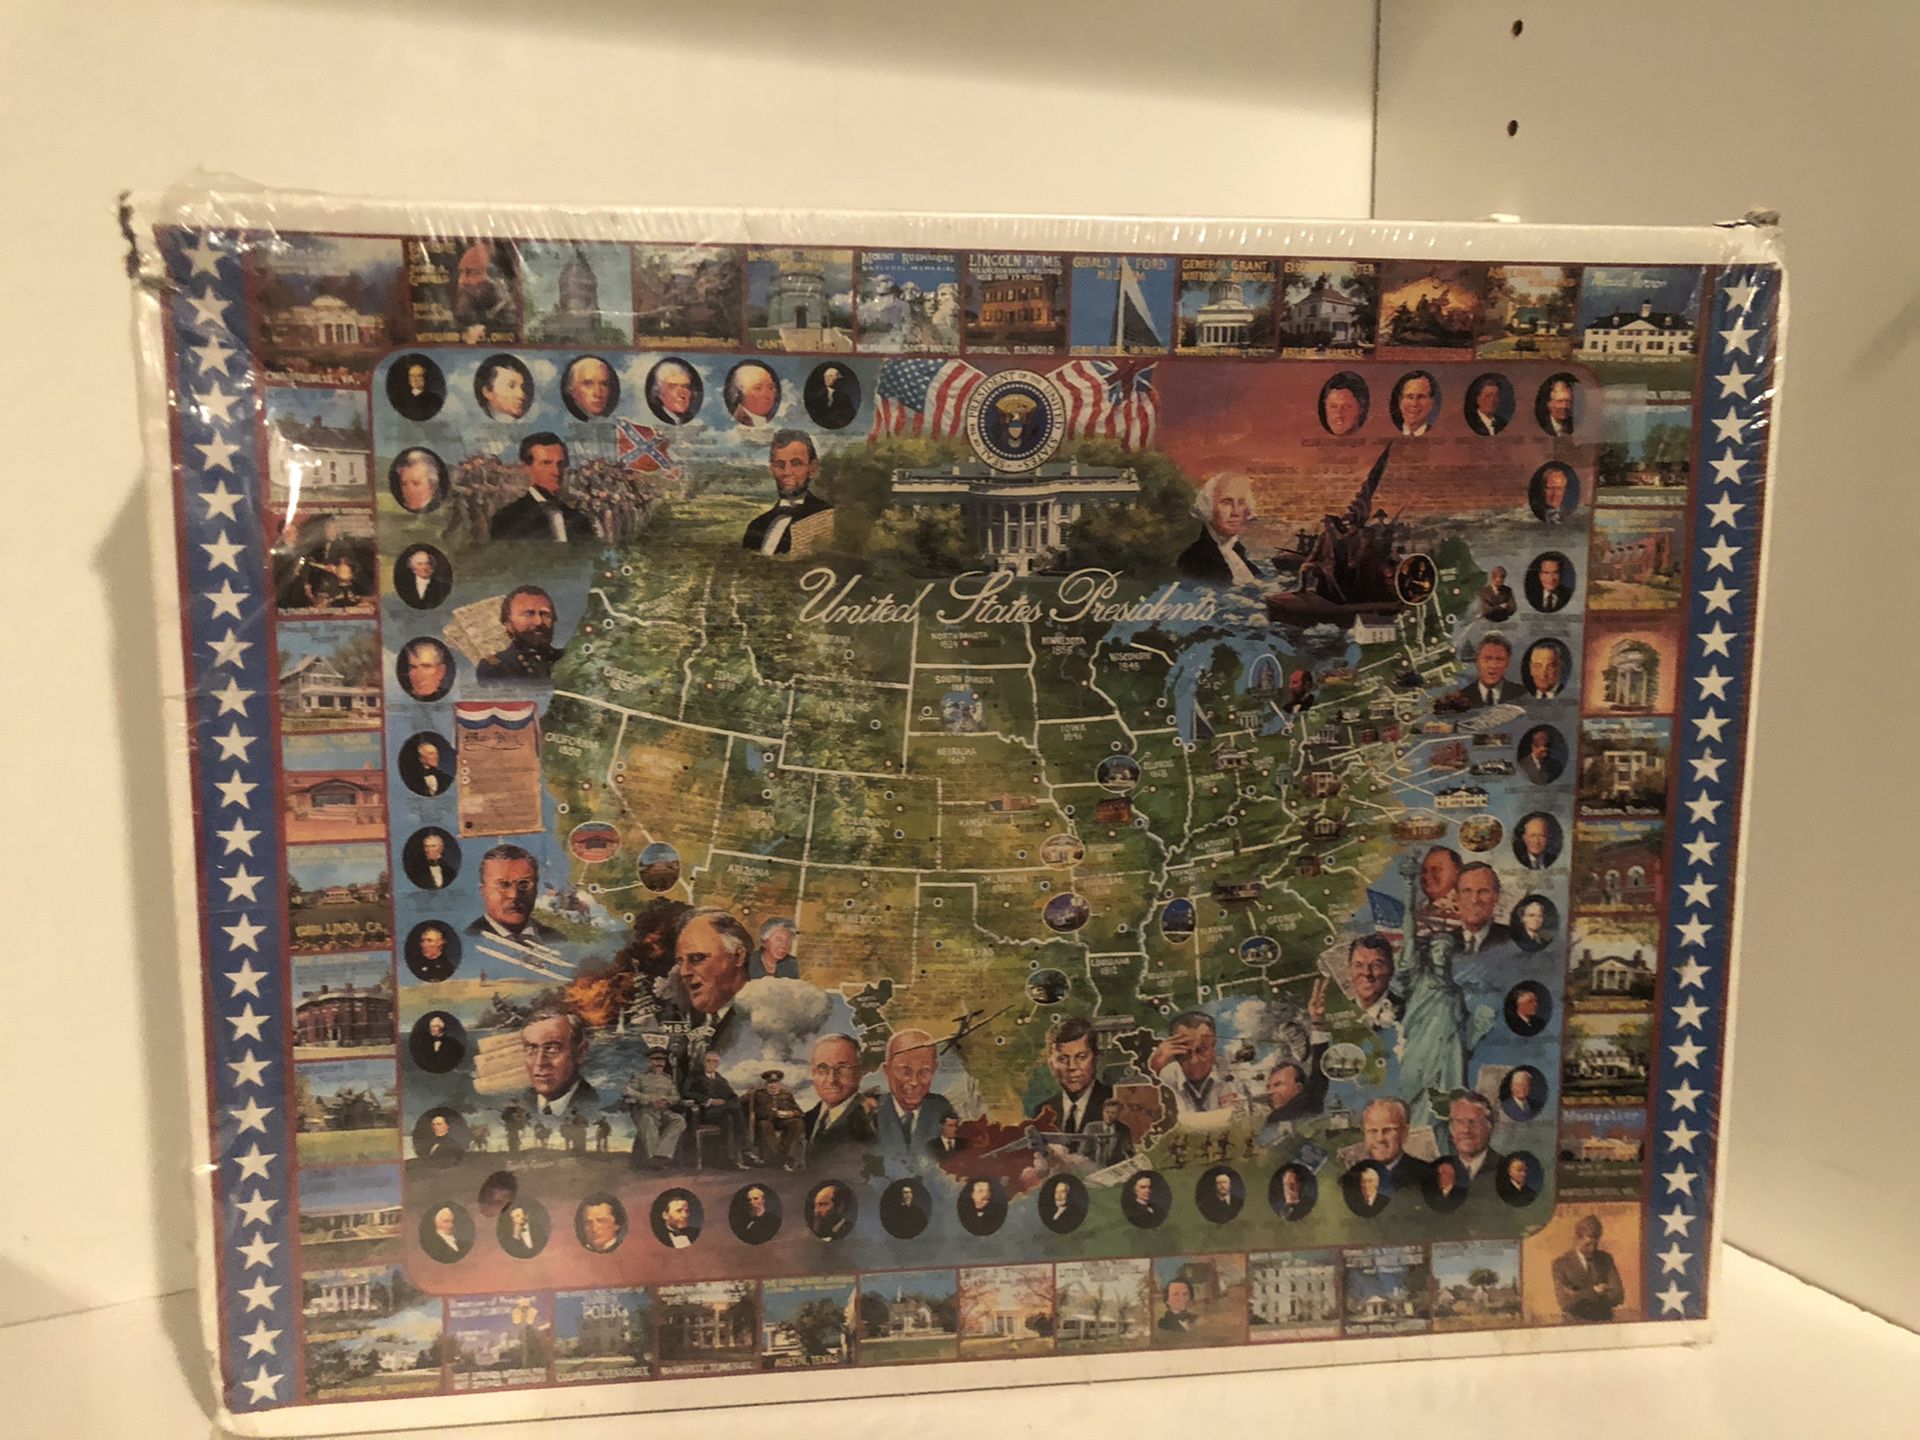 Puzzle - The United States of America’s President history 1,000 piece jigsaw puzzle - family game night NIB